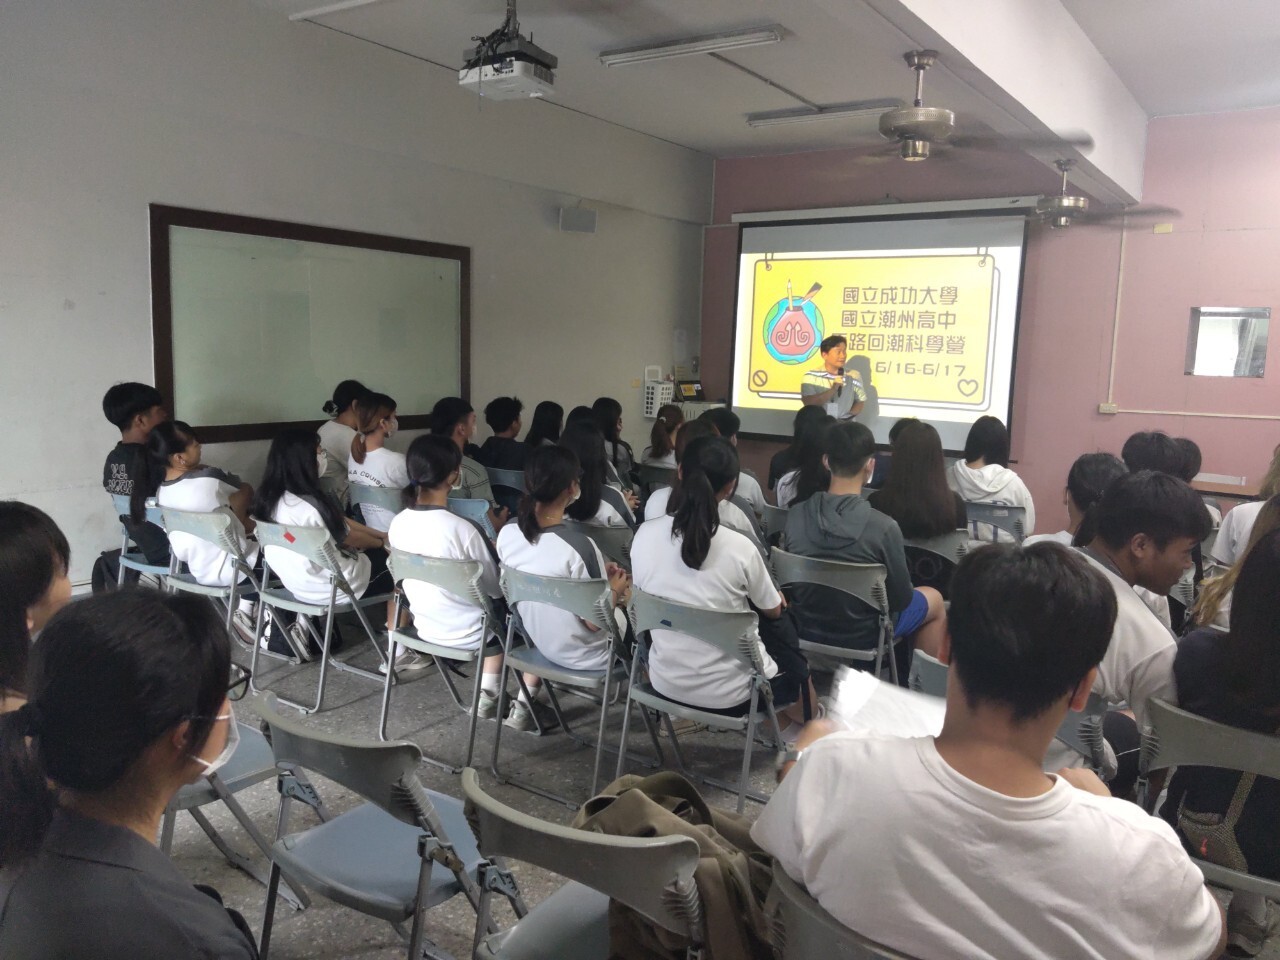 NCKU and Chao-Chou Senior High's Science Camp: Integrating Science and Indigenous Culture, Garnering Acclaim